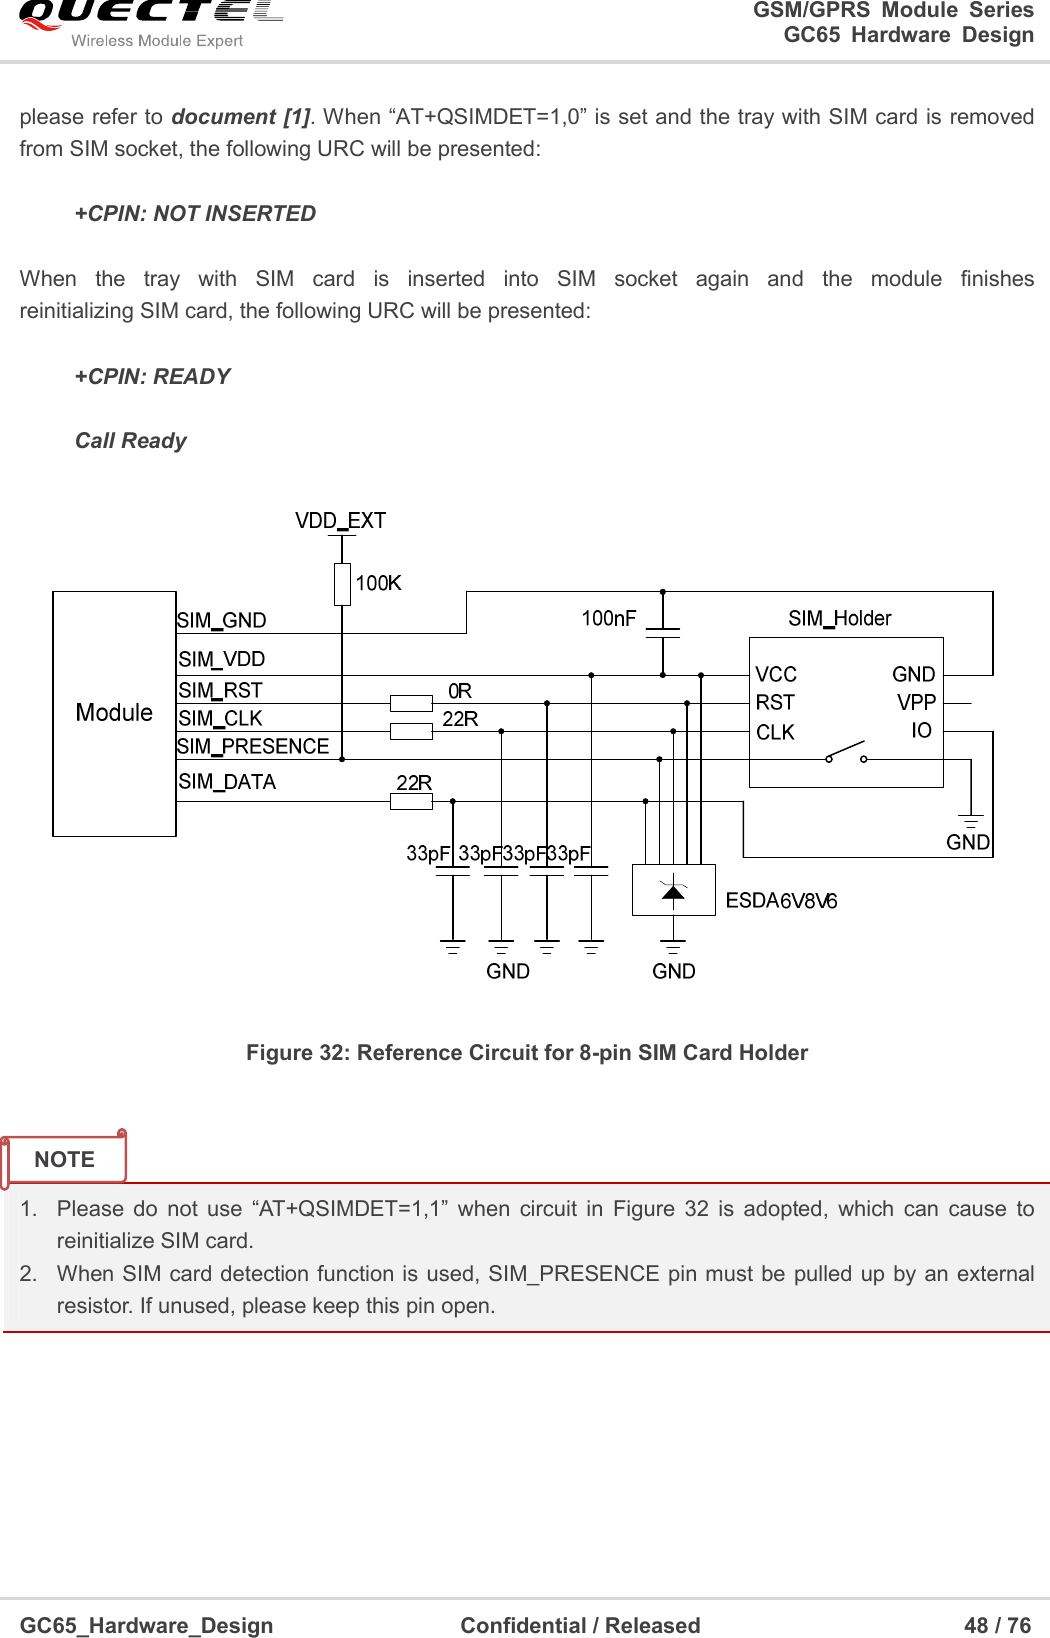                                                                          GSM/GPRS  Module  Series                                                                 GC65 Hardware Design  GC65_Hardware_Design                                  Confidential / Released                                                48 / 76      please refer to document [1]. When “AT+QSIMDET=1,0” is set and the tray with SIM card is removed from SIM socket, the following URC will be presented:       +CPIN: NOT INSERTED  When  the  tray  with  SIM  card  is  inserted  into  SIM  socket  again  and  the  module  finishes               reinitializing SIM card, the following URC will be presented:  +CPIN: READY  Call Ready  Figure 32: Reference Circuit for 8-pin SIM Card Holder   1.  Please  do  not  use  “AT+QSIMDET=1,1”  when  circuit  in  Figure  32  is  adopted,  which  can  cause  to reinitialize SIM card. 2.  When SIM card detection function is used, SIM_PRESENCE pin must be  pulled up by an  external resistor. If unused, please keep this pin open.         NOTE 